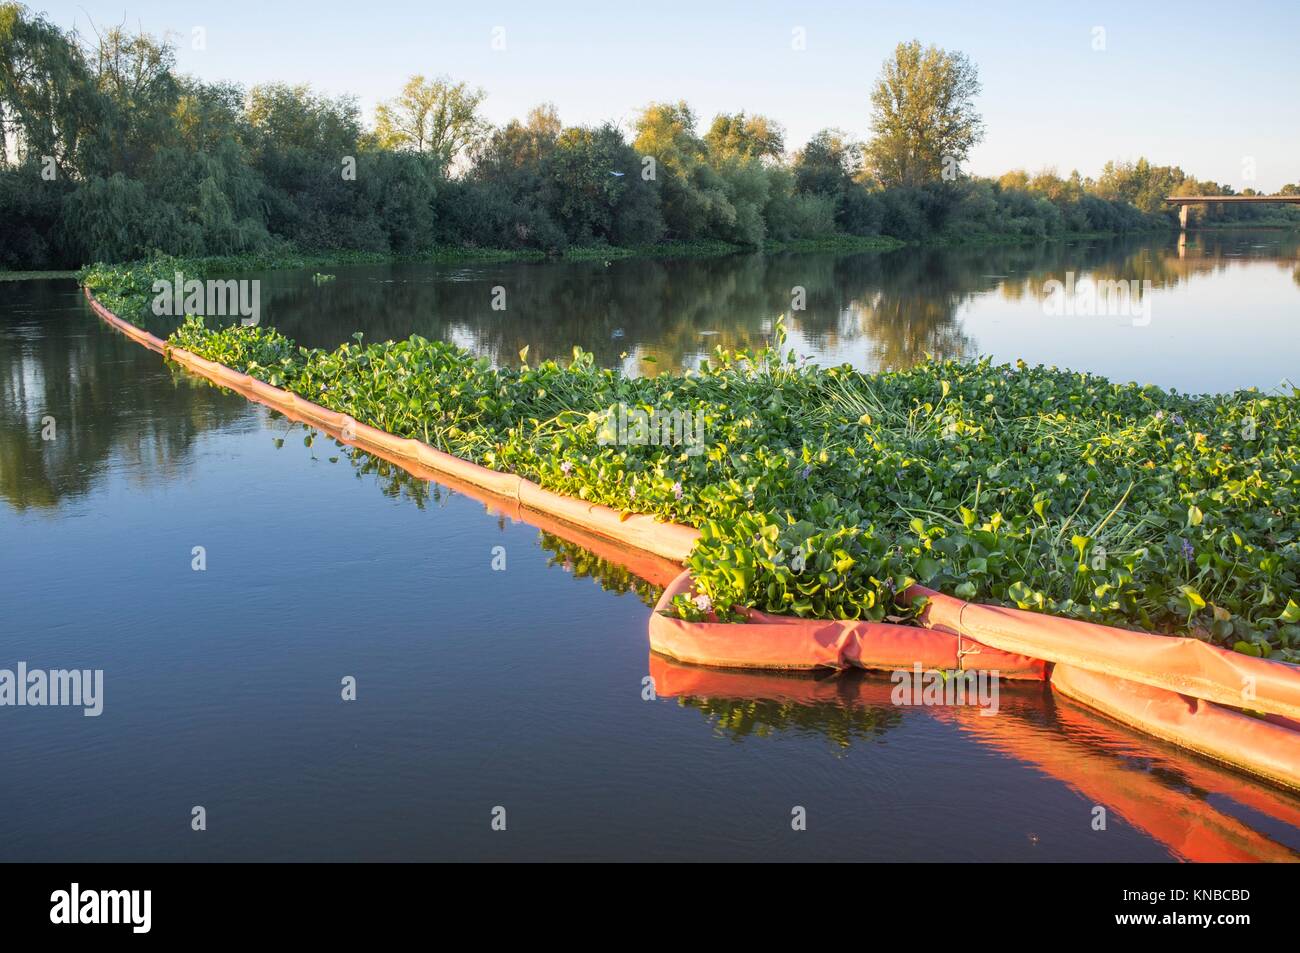 Floating barrier for control of invasive plant water hyacinth. Highly problematic invasive species at Guadiana River, Badajoz, Spain. Stock Photo